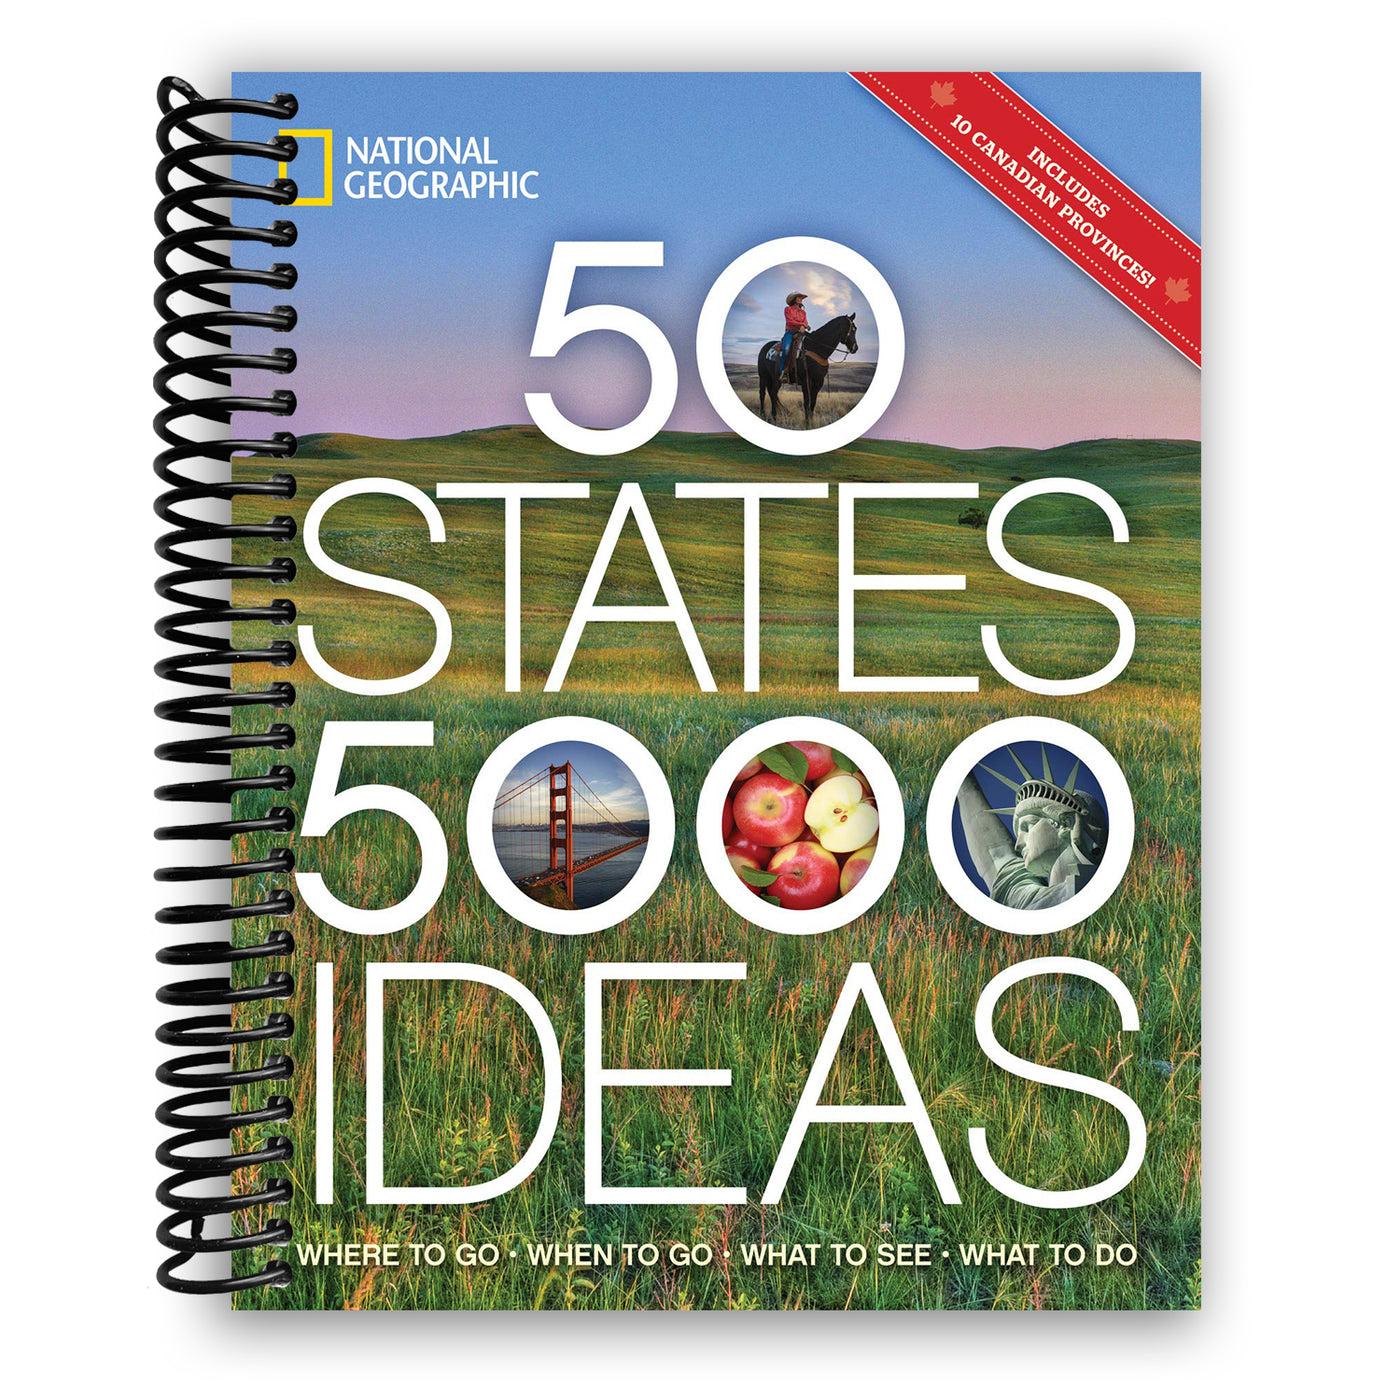 50 States, 5,000 Ideas: Where to Go, When to Go, What to See, What to Do (Spiral Bound)